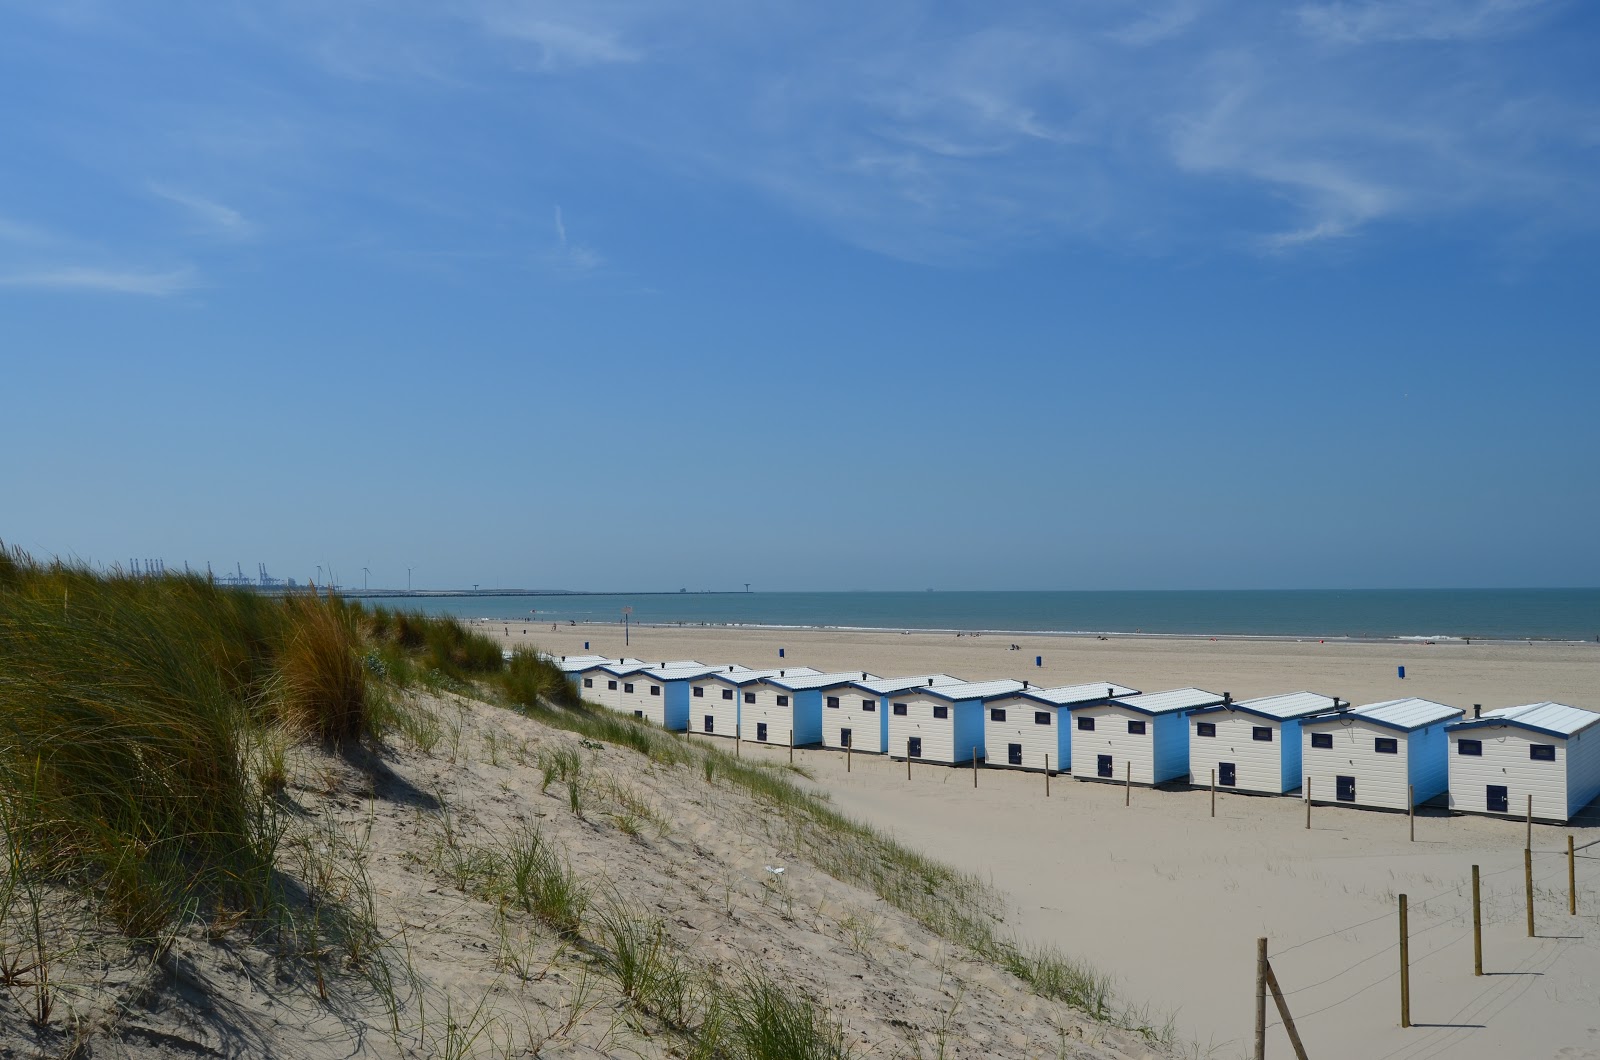 Photo of Strand Kijkduin with turquoise water surface